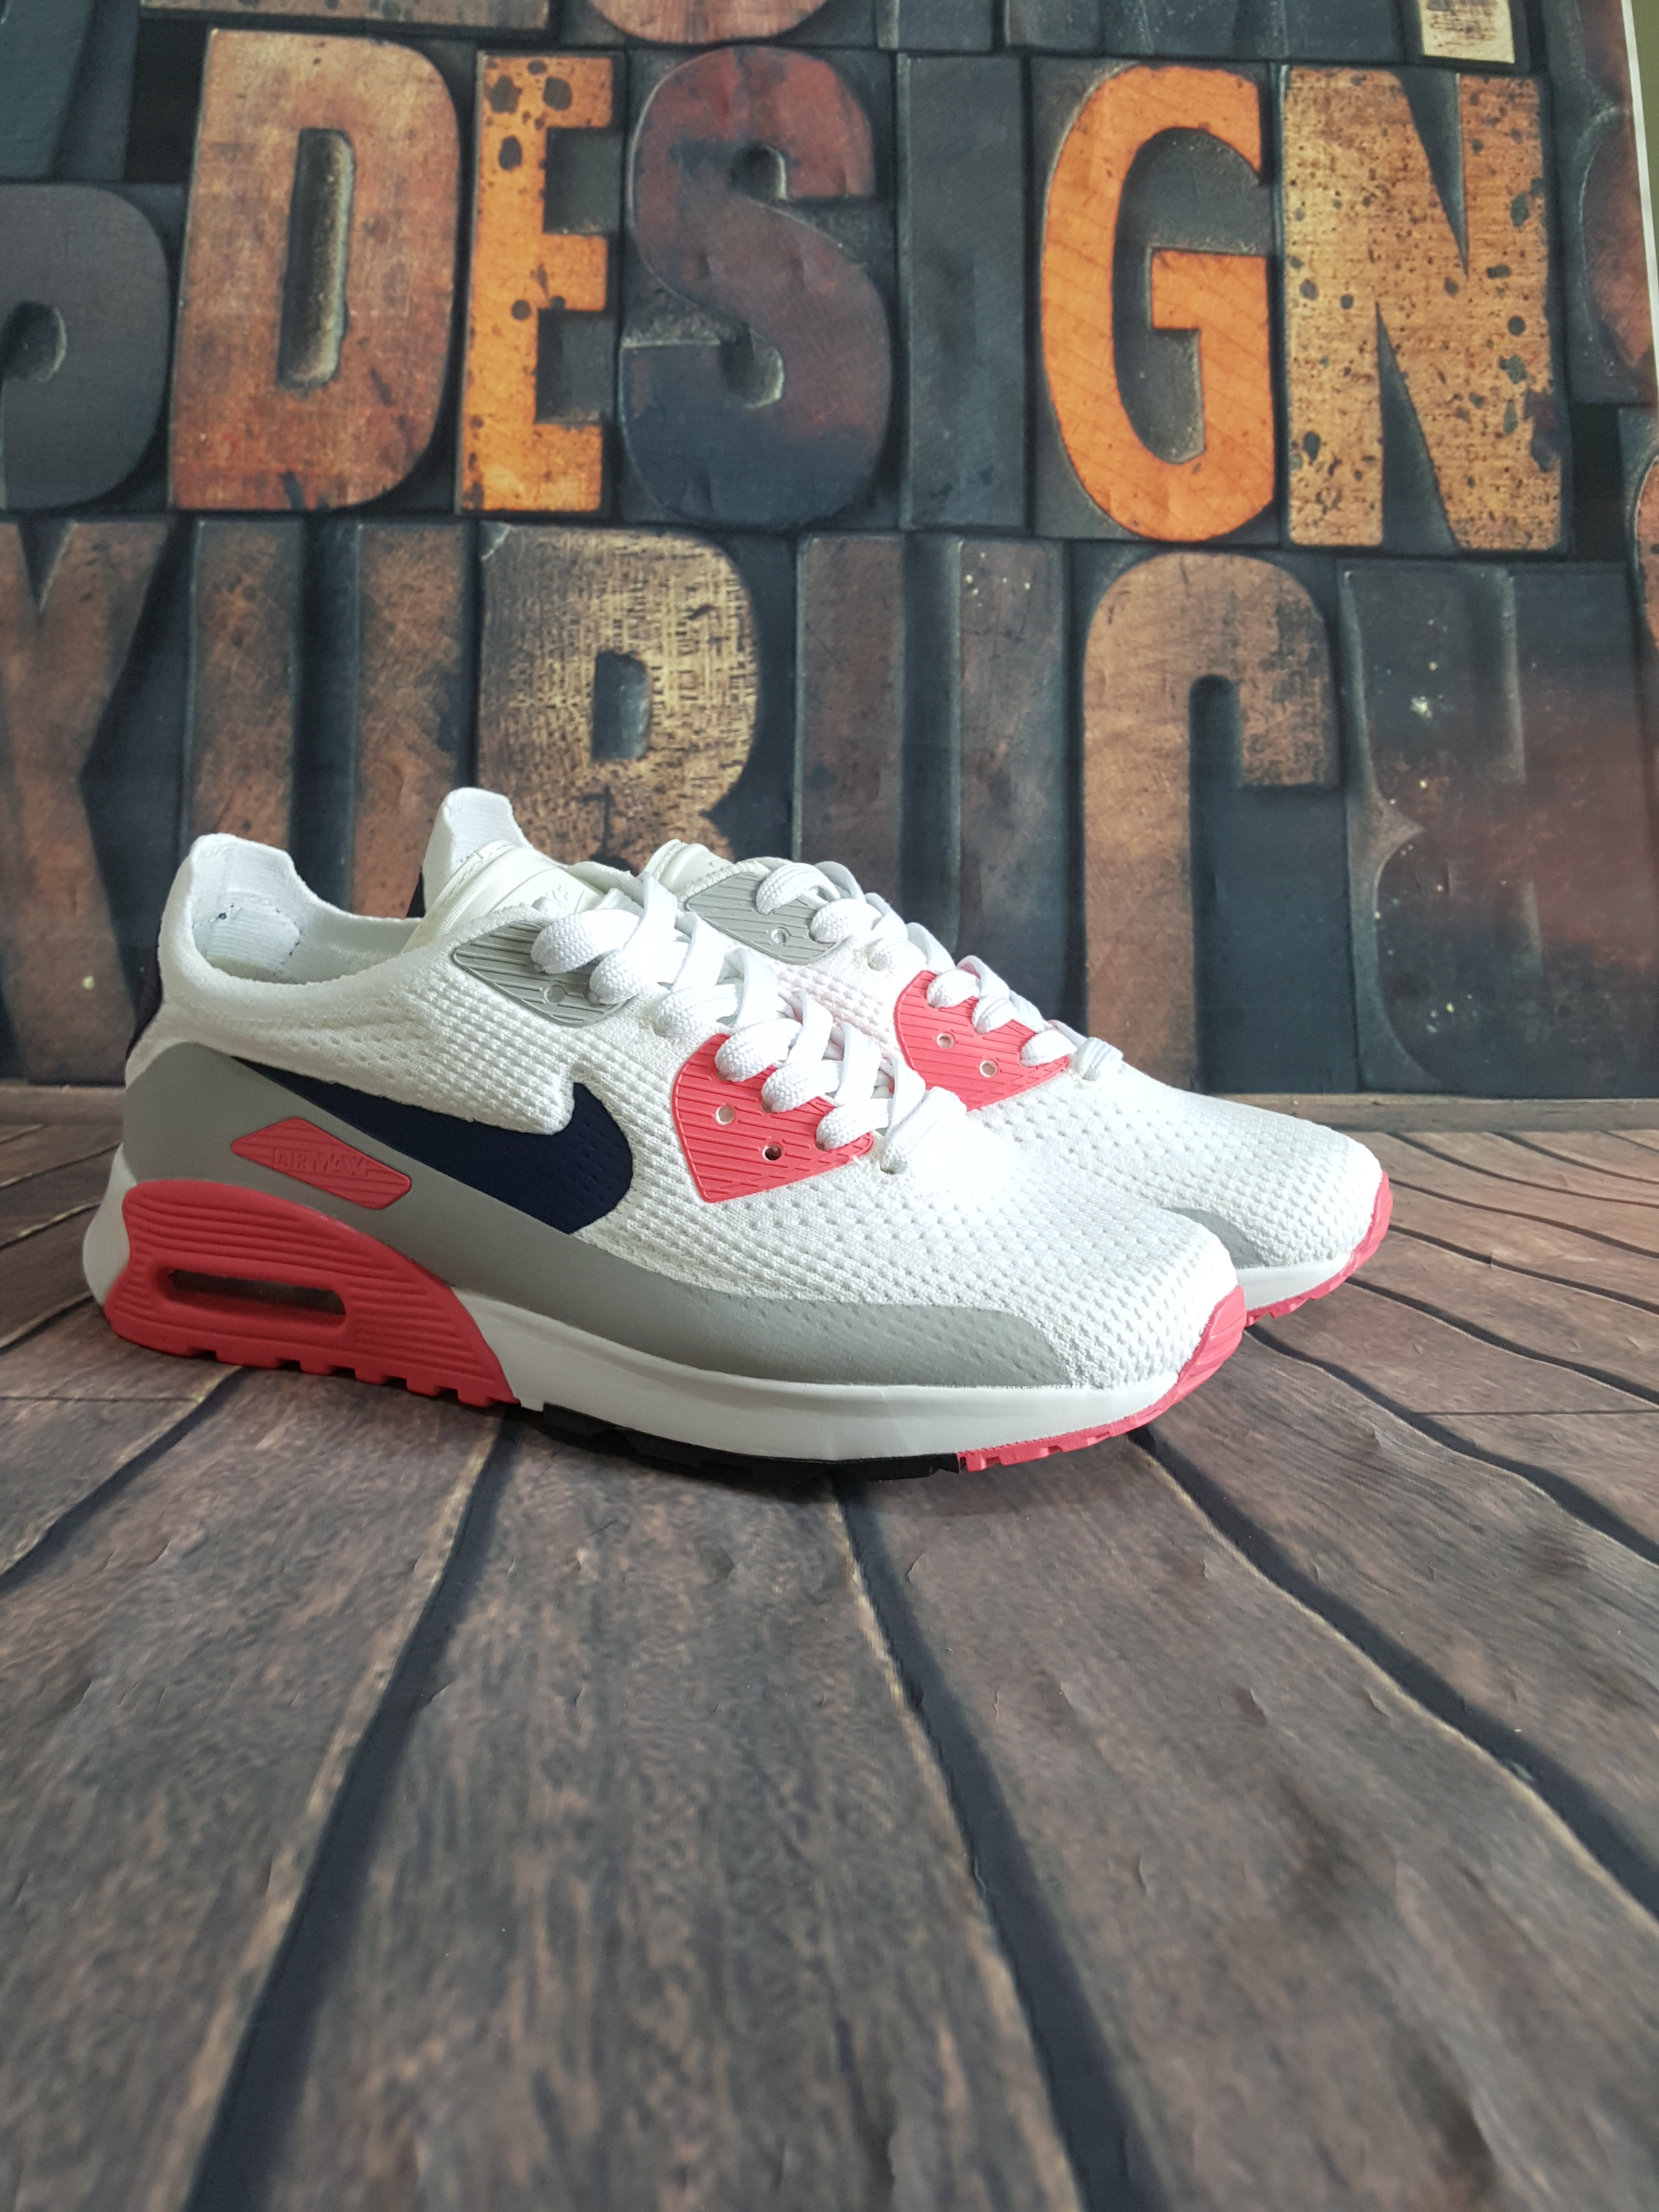 Nike Air Max 90 Flyknit White Grey Red Black Shoes